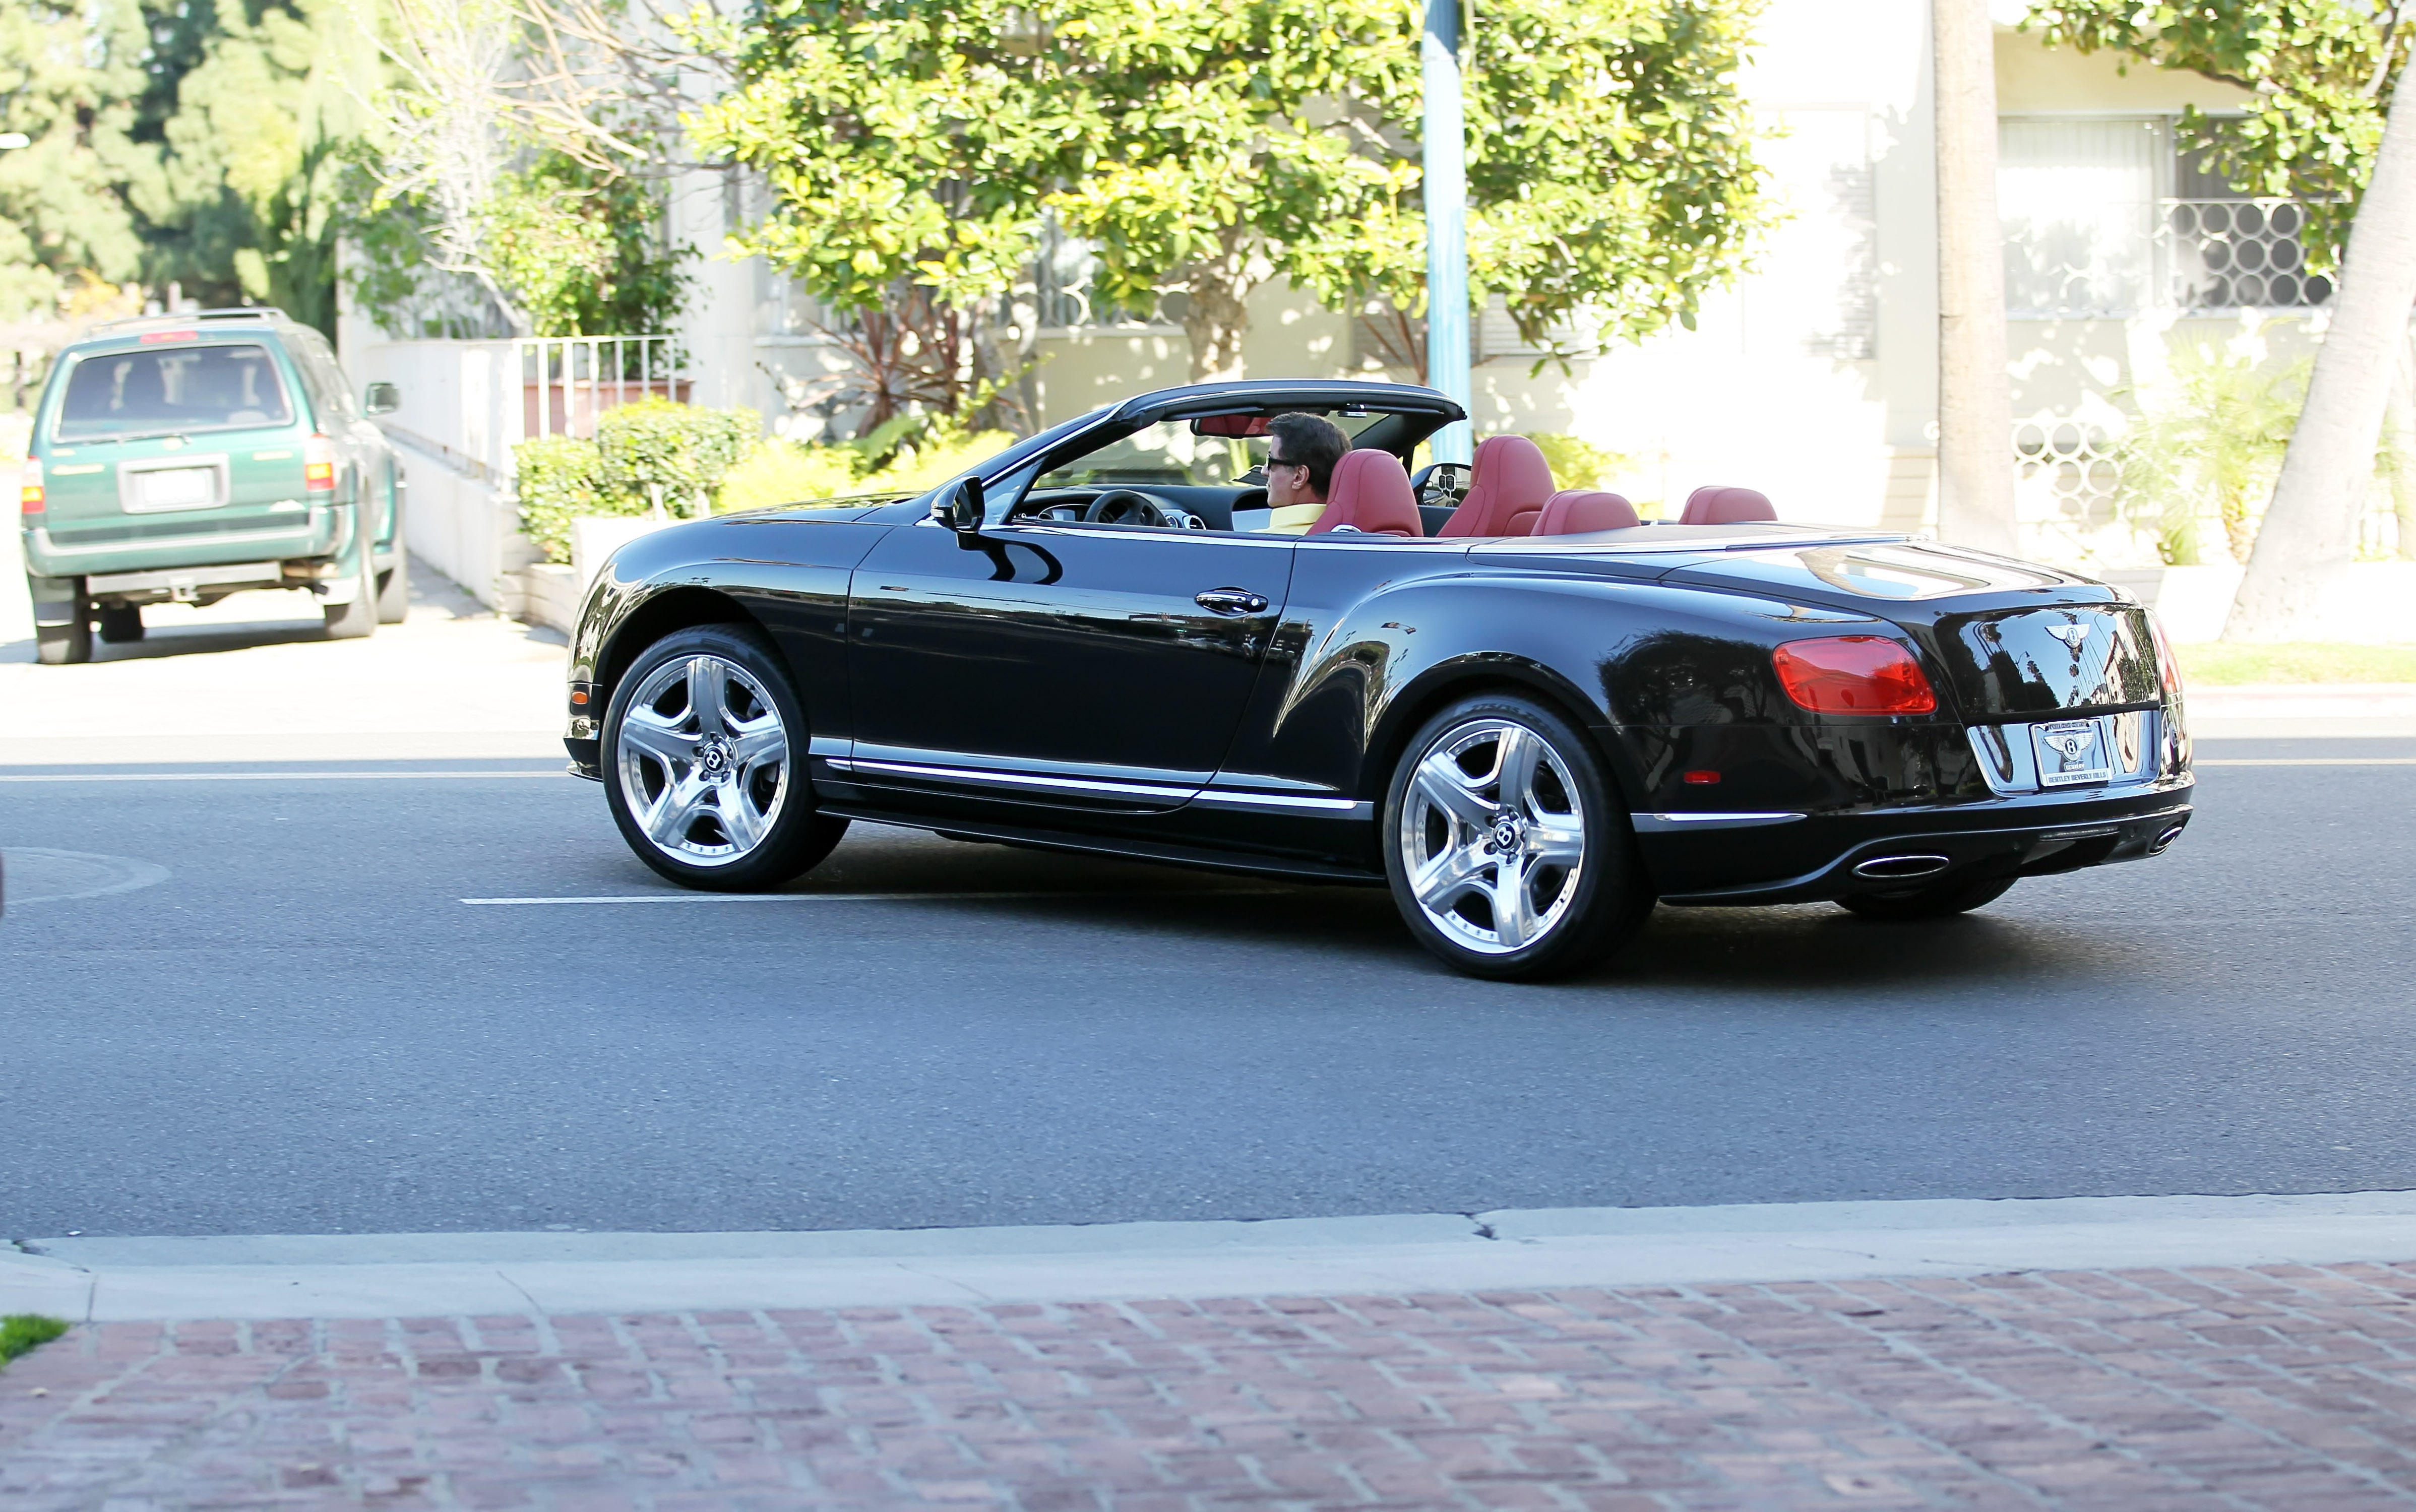 Sly drives his Bentley GT convertible in Beverly Hills